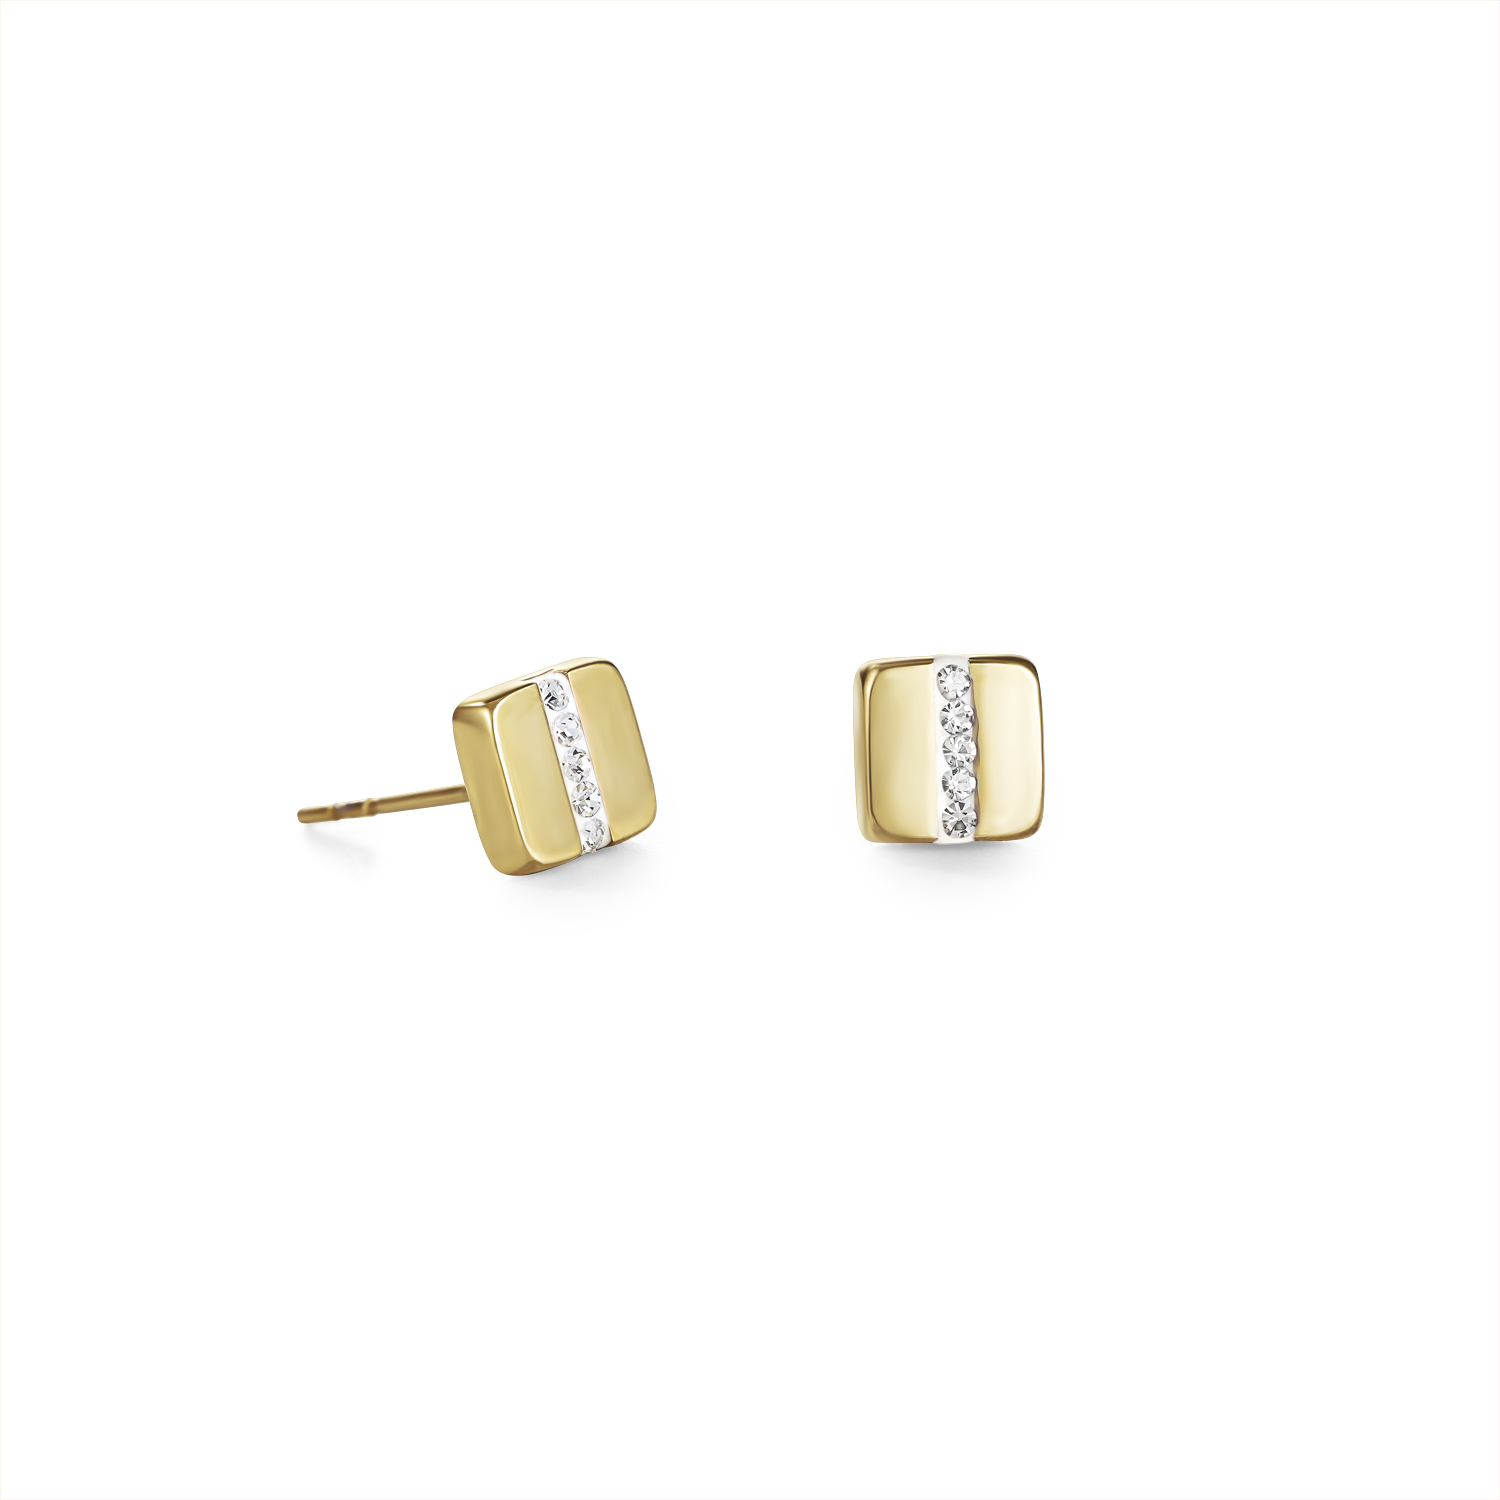 Earrings stainless steel square gold & crystals pavé strip crystal